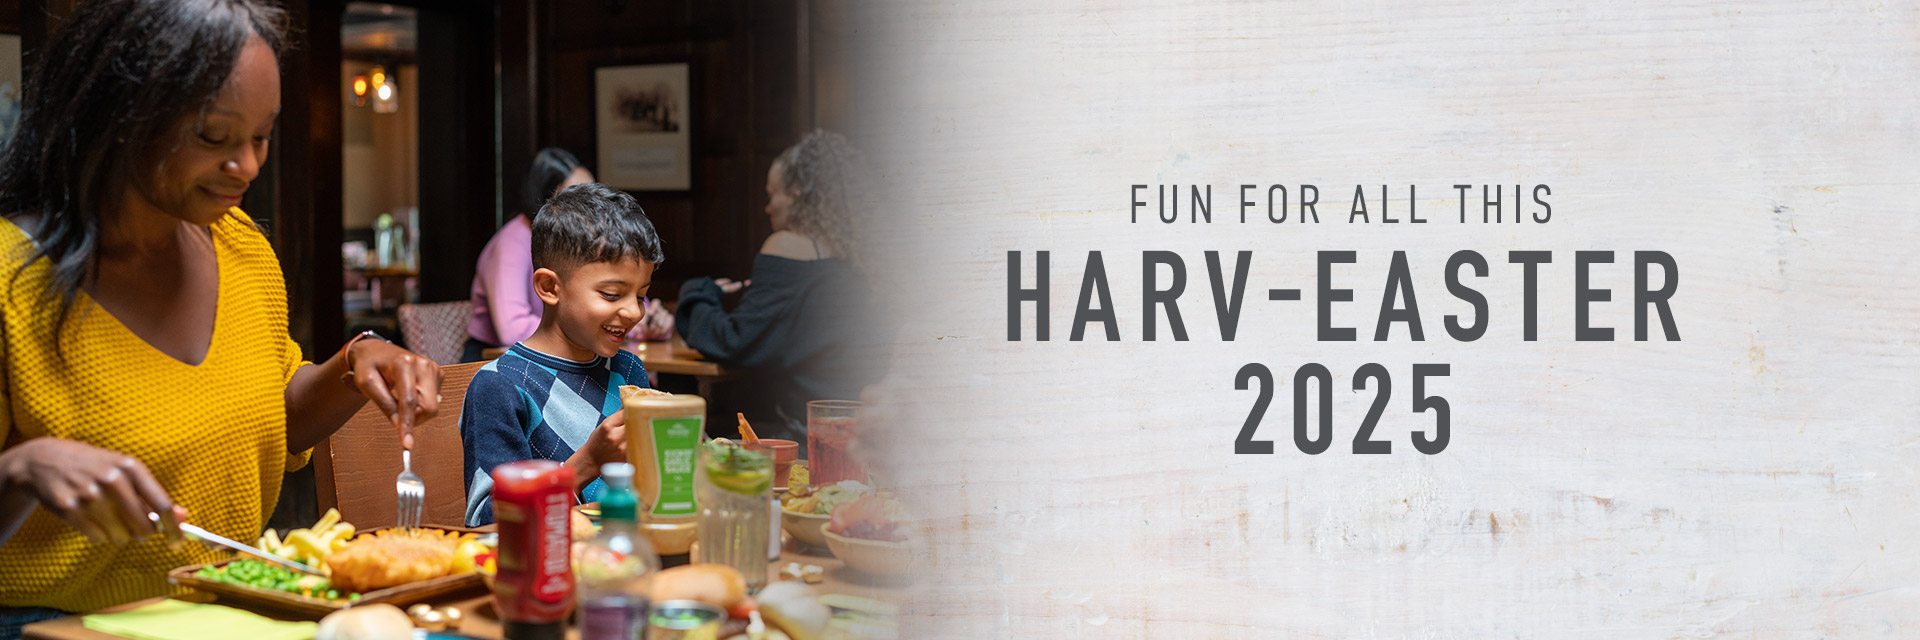 Easter at Harvester Ravenswood in Ipswich 2025